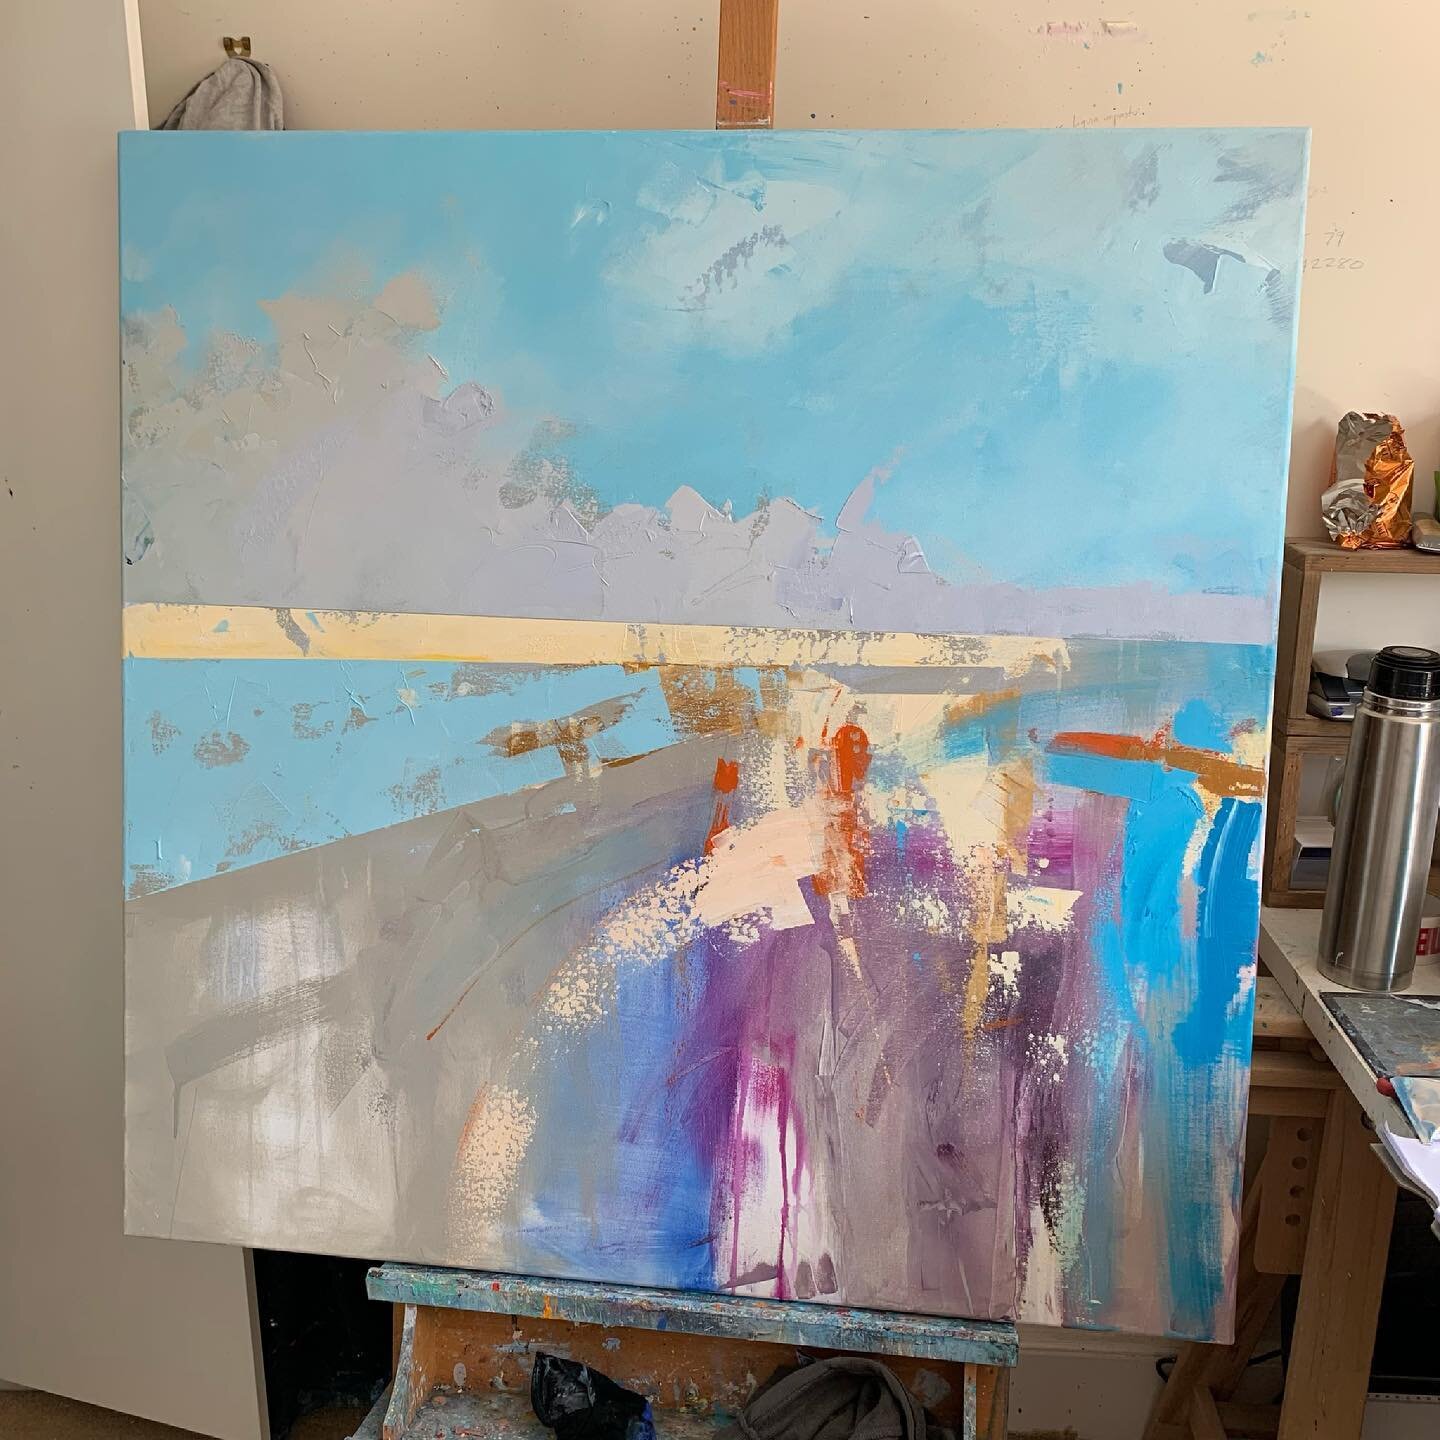 WORKS IN PROGRESS

It&rsquo;s due to be a scorcher today!! Tempted to take these all outside!

#naomcdowellart #cornwall #londonartist #oilpaint #oiloncanvas #cornwallcoast #colour #abstractpainting #devon #contemporaryart #landscapeart #landscapepai